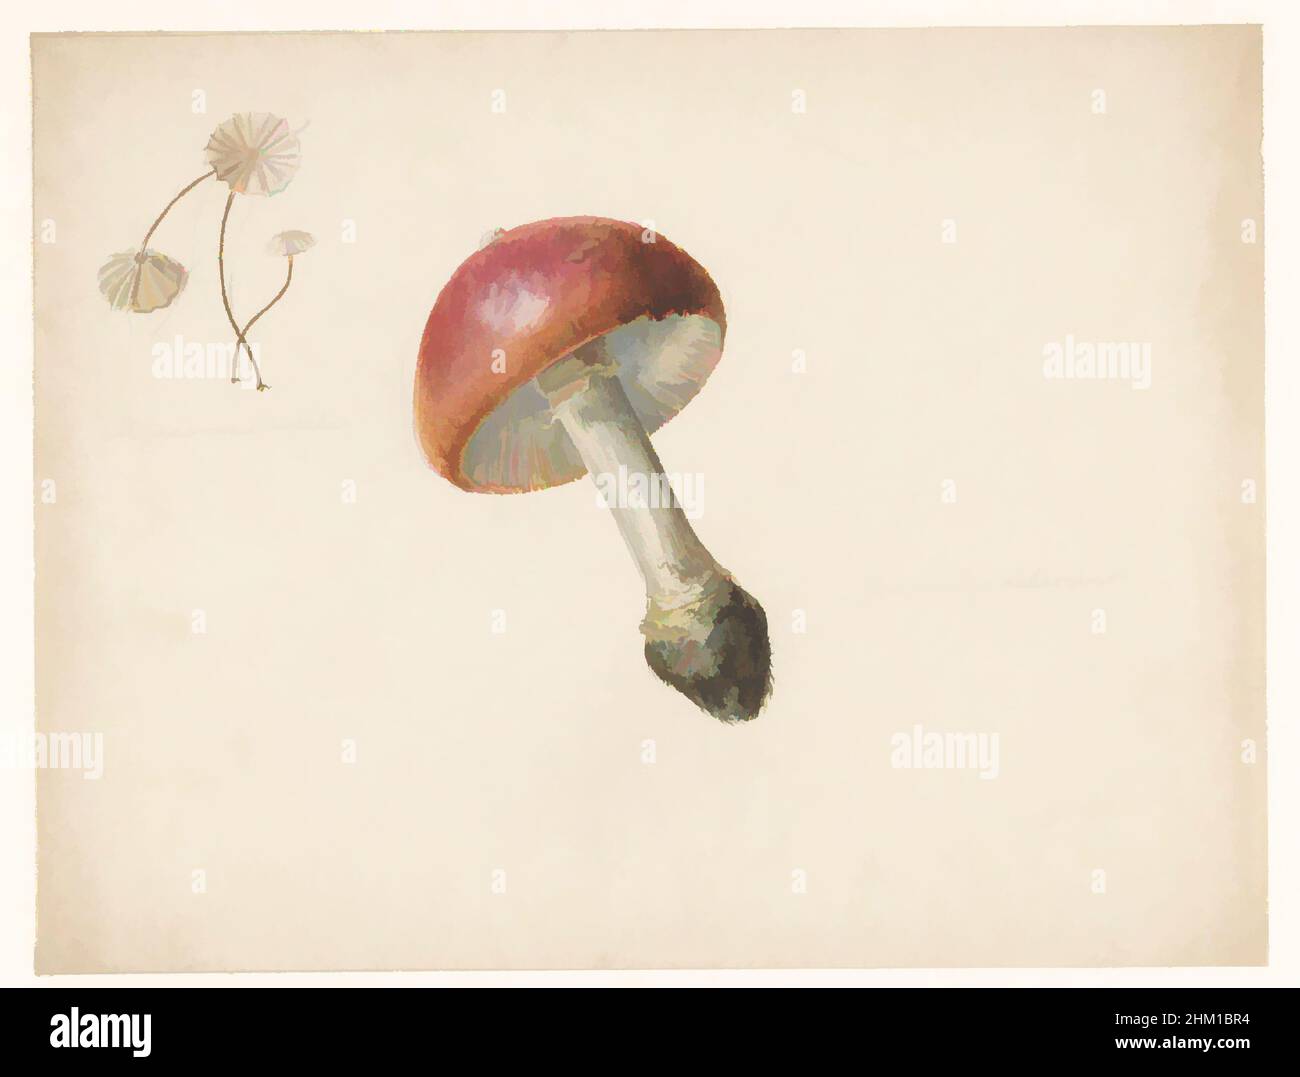 Art inspired by Study sheet with mushrooms, the Amanita Rubescens and the Marasmius Rotula, draughtsman: Albertus Steenbergen, 1824 - 1900, paper, pencil, brush, height 180 mm × width 235 mm, Classic works modernized by Artotop with a splash of modernity. Shapes, color and value, eye-catching visual impact on art. Emotions through freedom of artworks in a contemporary way. A timeless message pursuing a wildly creative new direction. Artists turning to the digital medium and creating the Artotop NFT Stock Photo